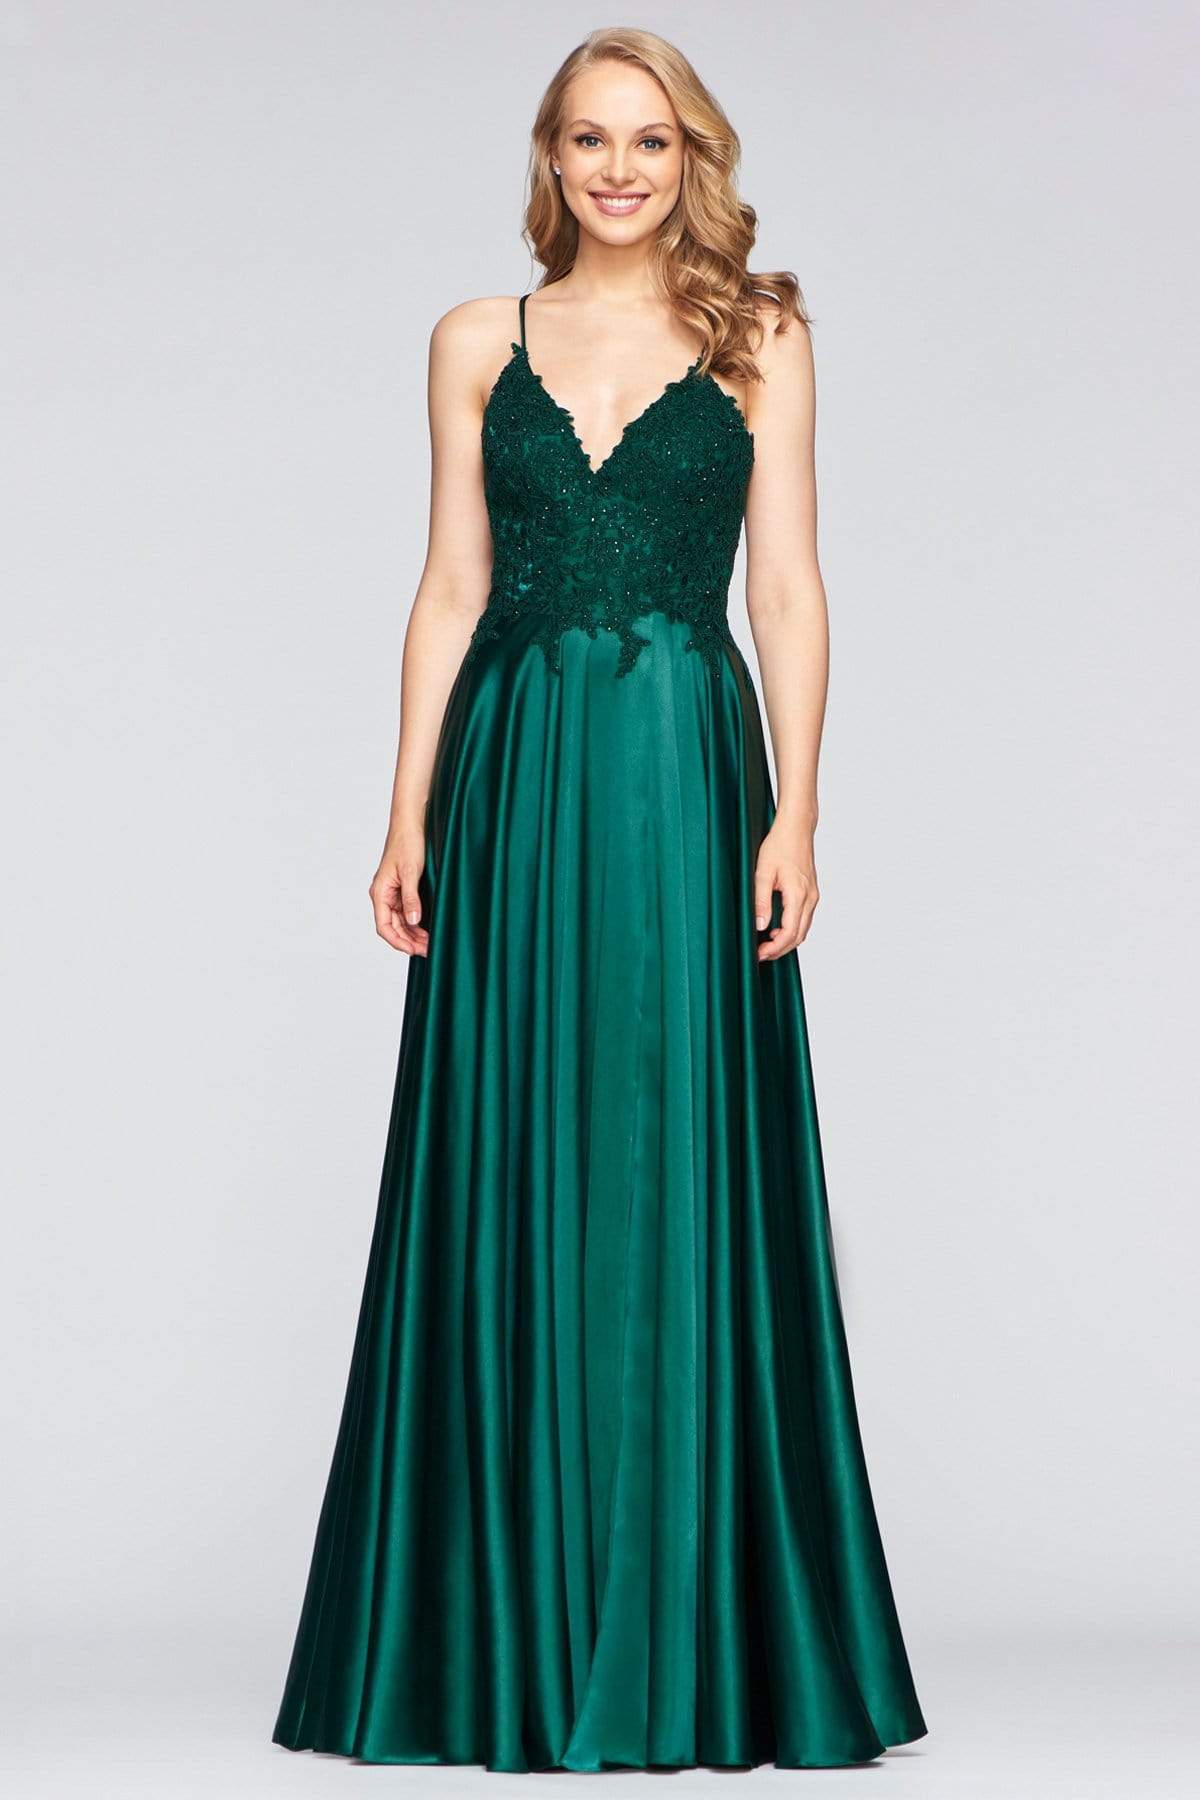 Faviana - S10400 Beaded Lace V Neck Flowy Satin Gown Prom Dresses 00 / Deep Green